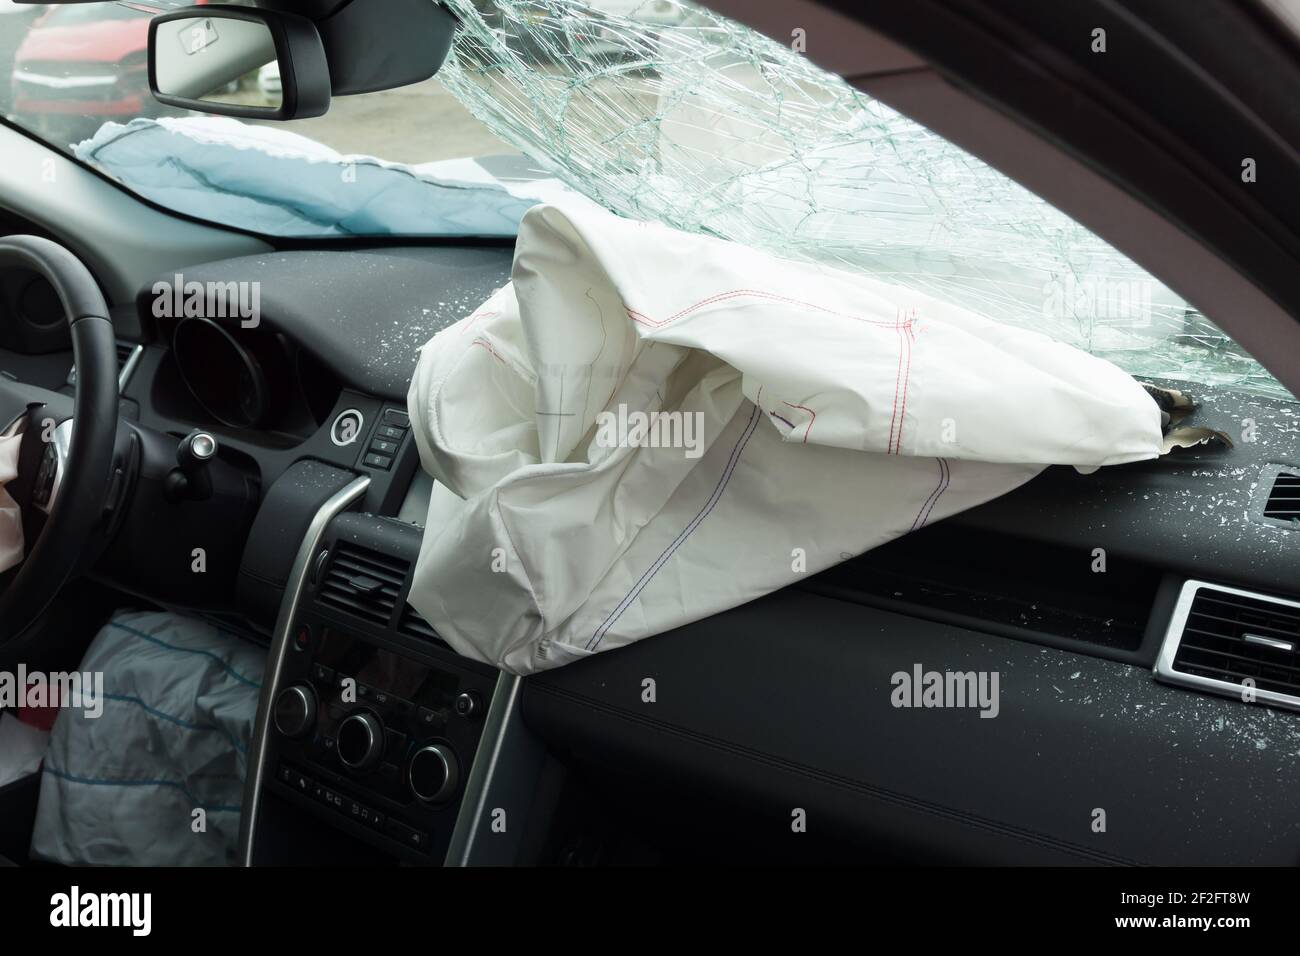 Interior of a automobile or car involved in a vehicle crash with a deployed passenger side airbag Stock Photo